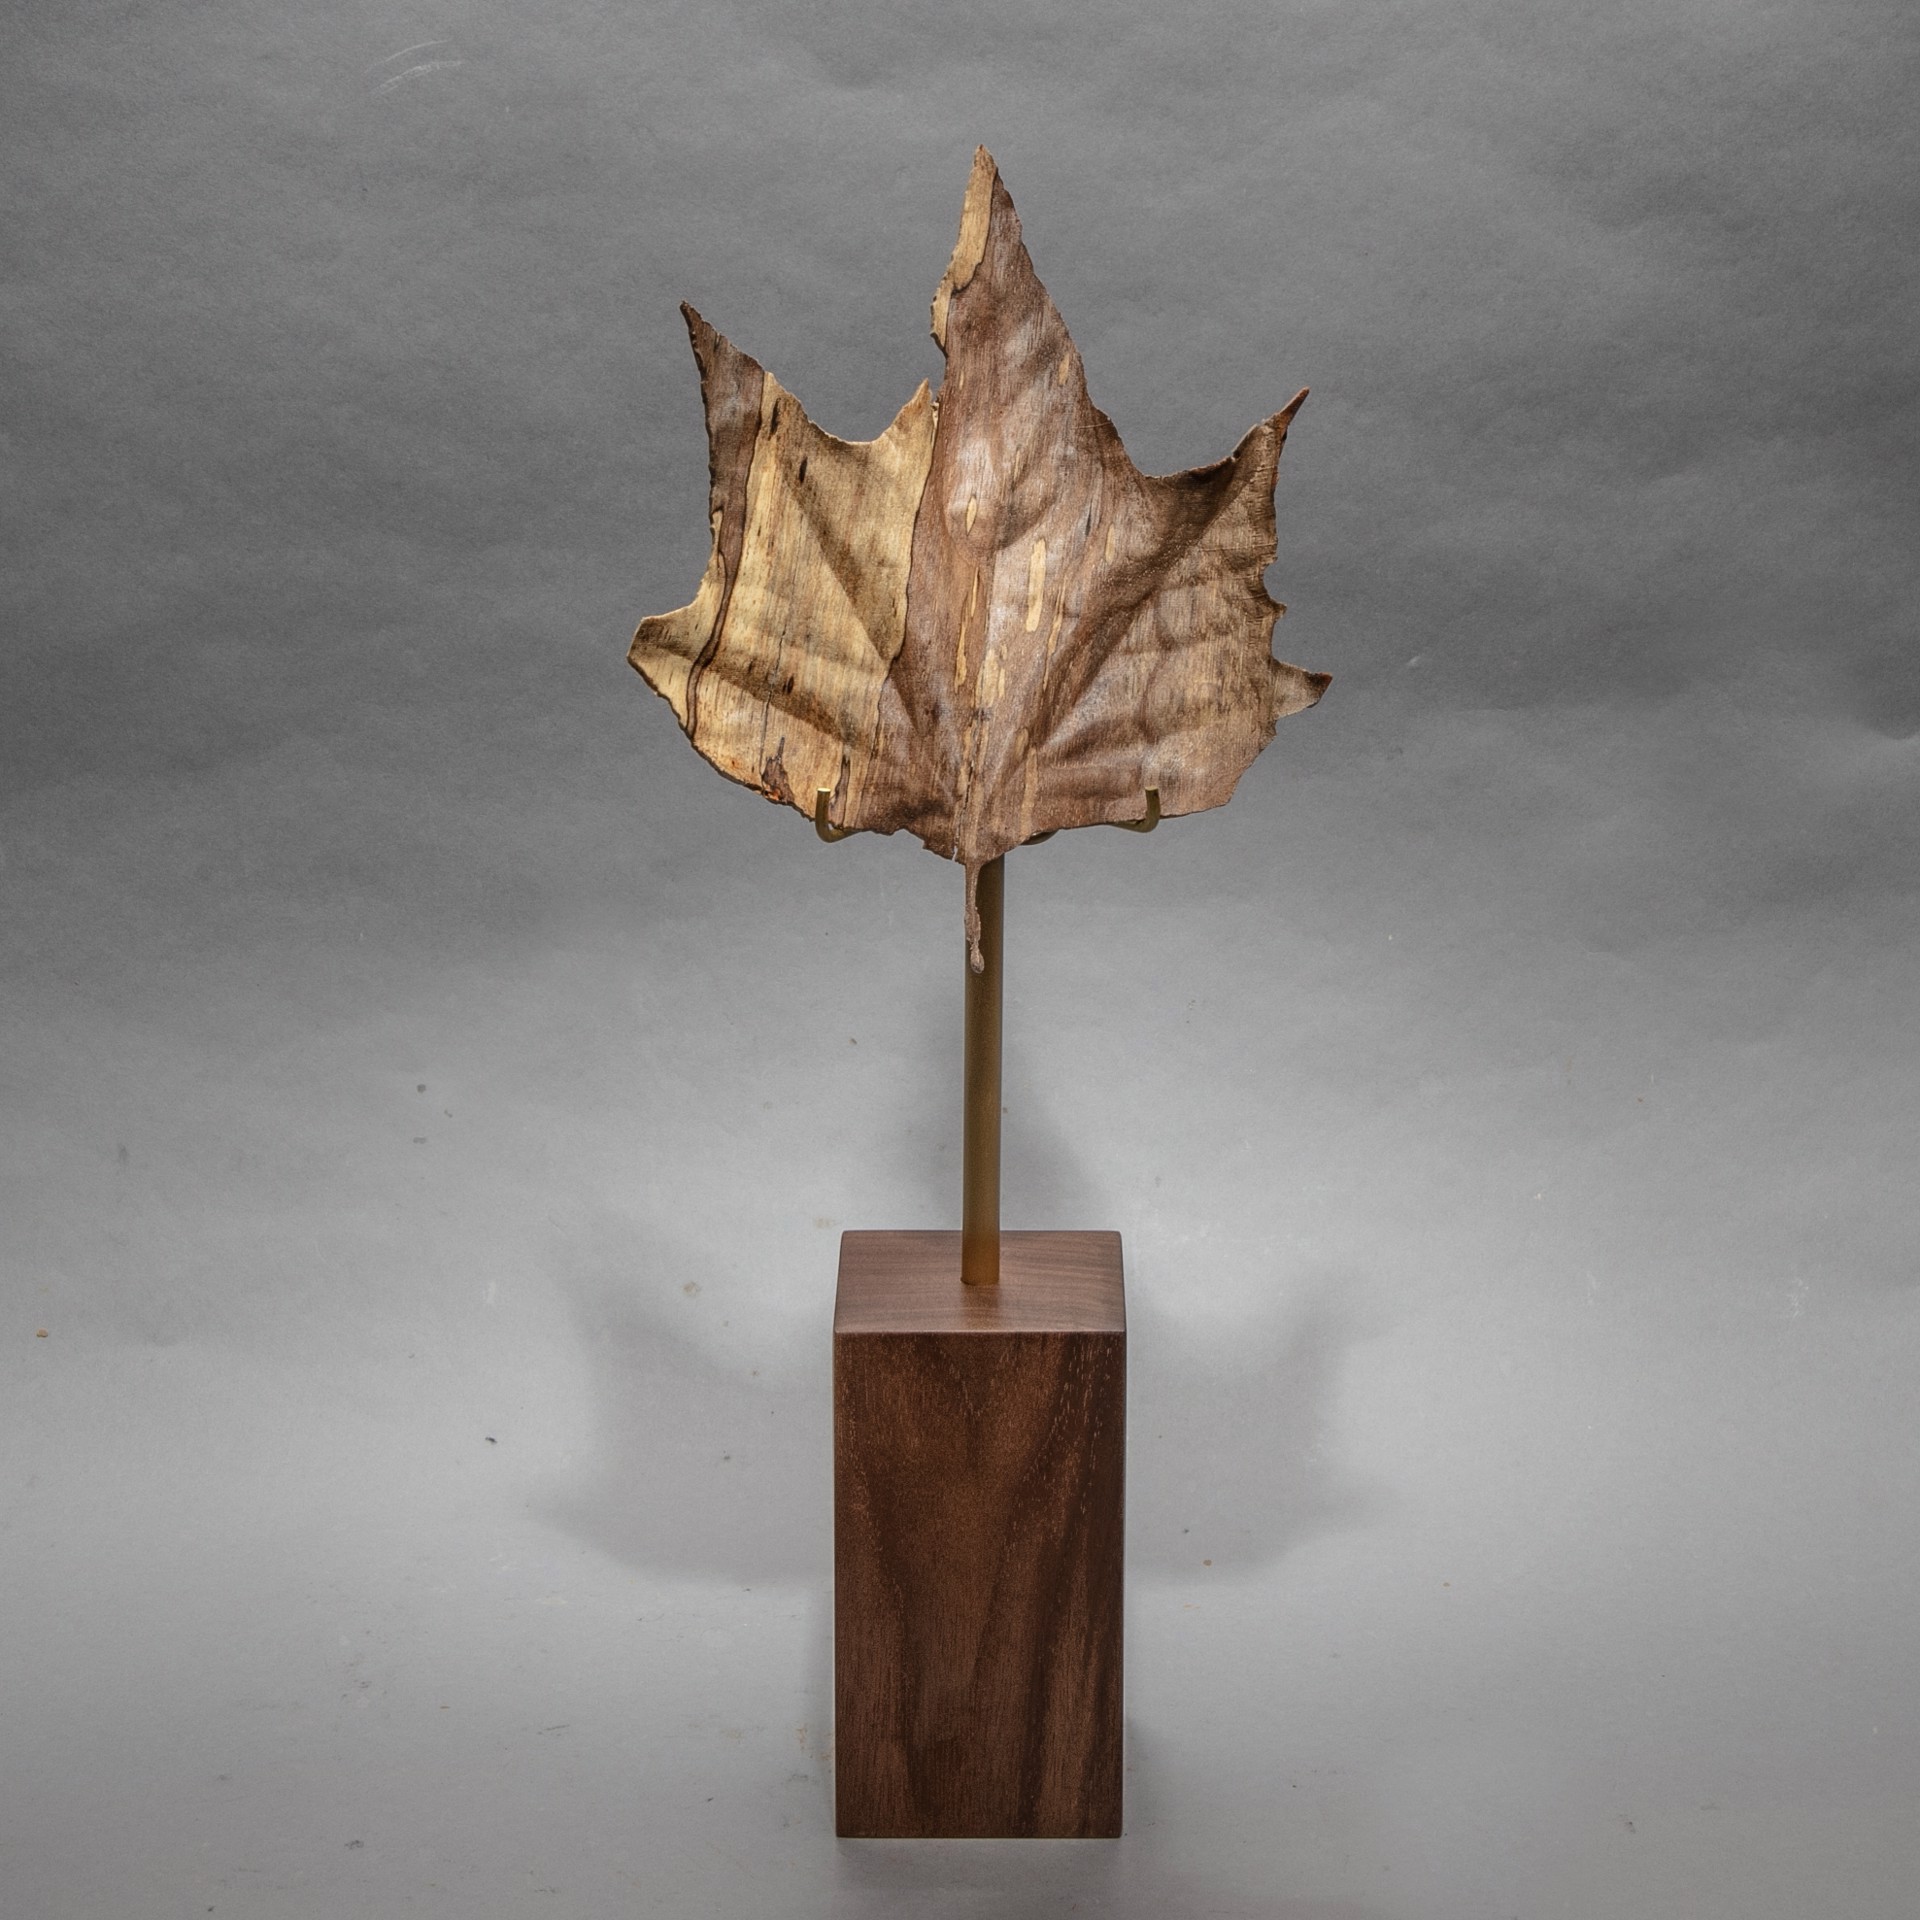 Specimen #10 - Sycamore leaf in local spalted sycamore by Dana Younger